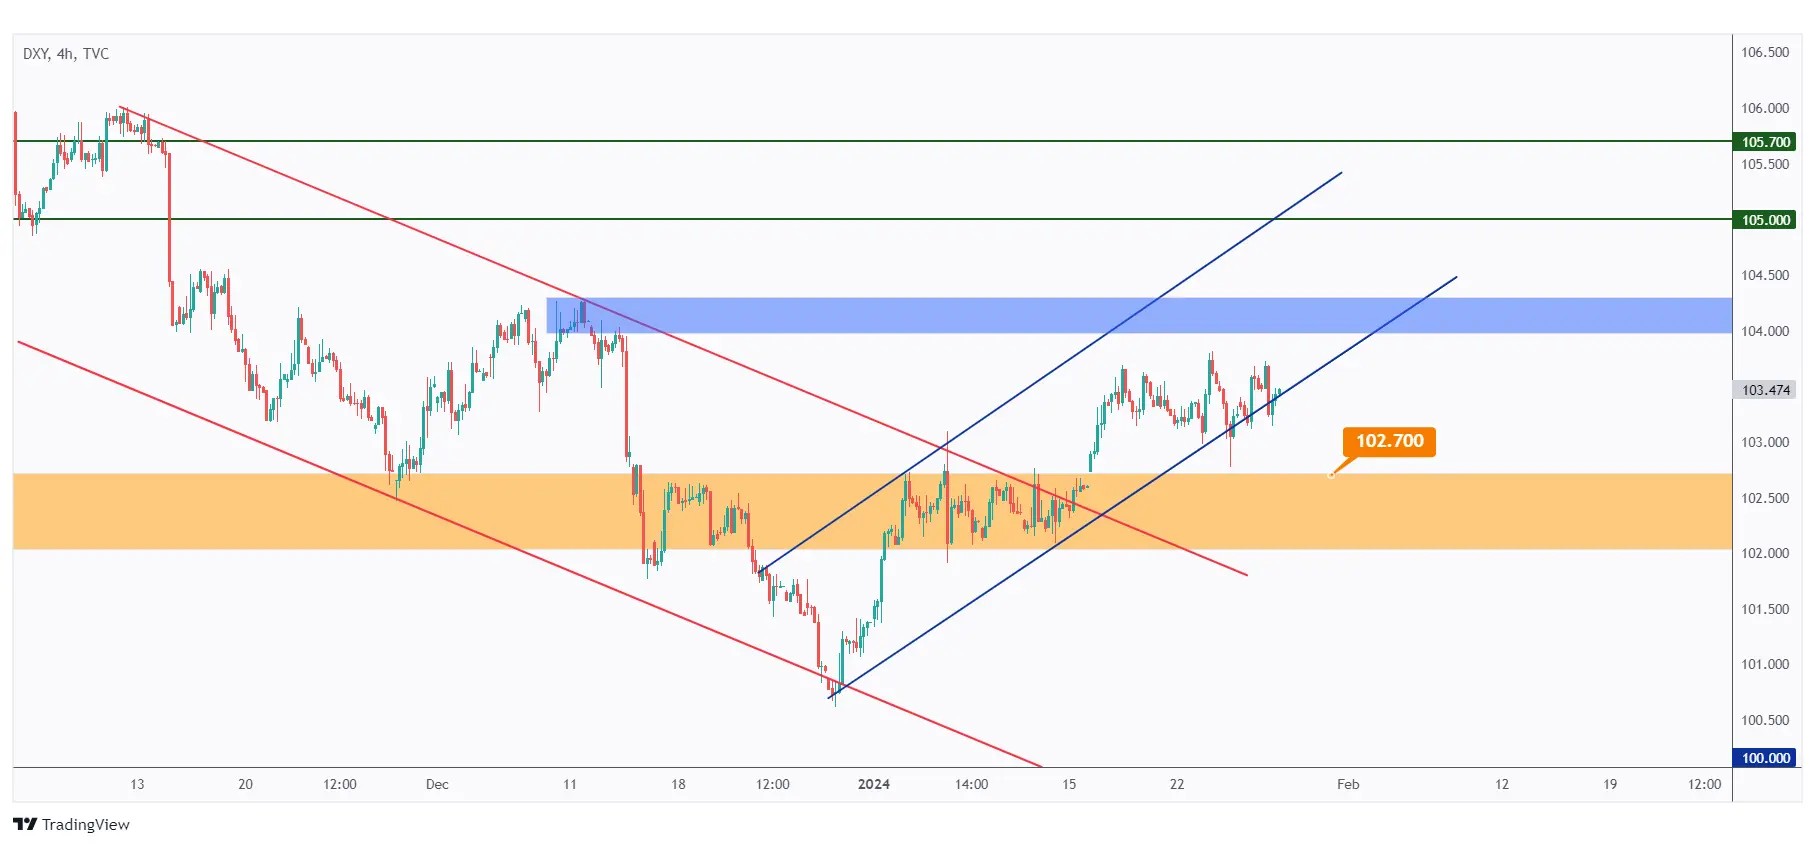 dxy 4h chart showing the overall bullish trend trading inside the rising channel.